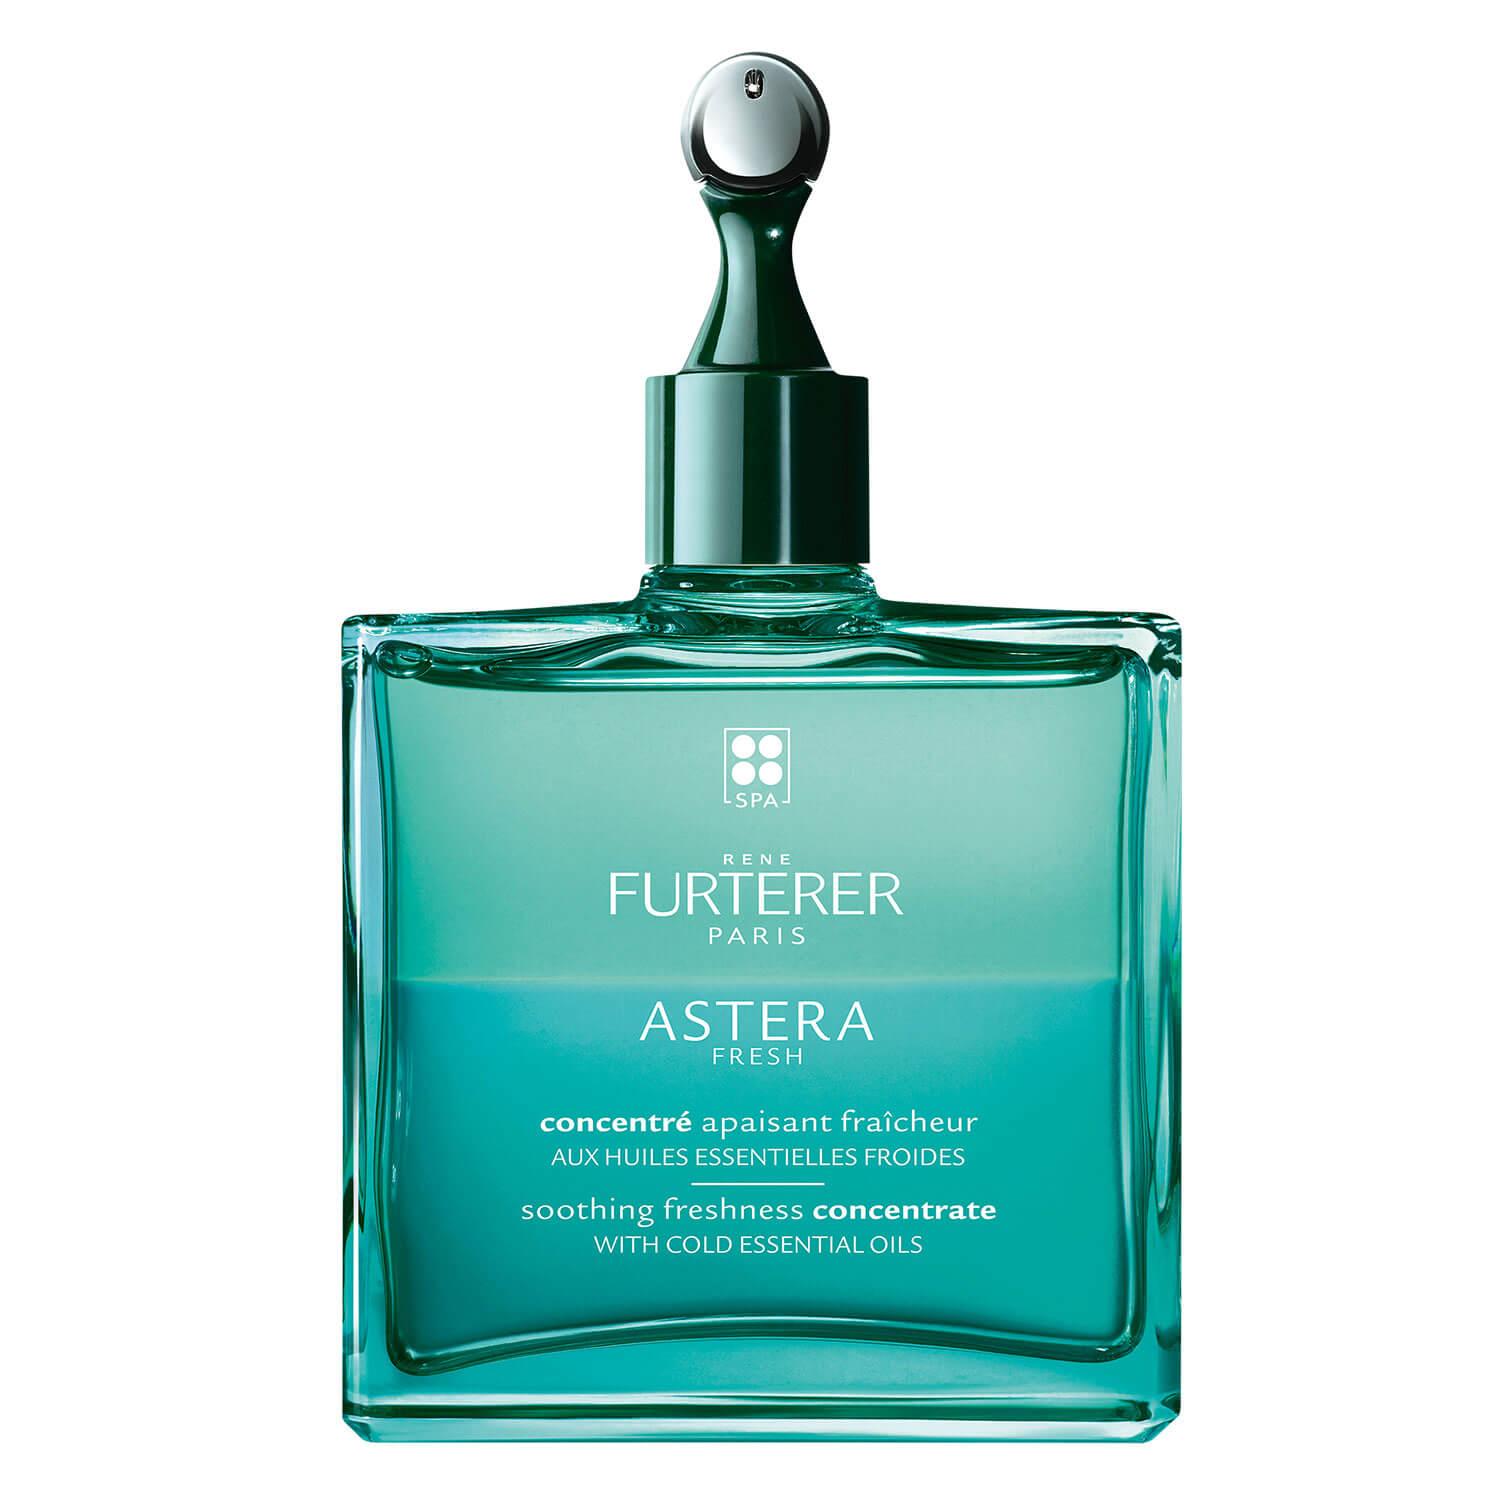 Astera Fresh - Soothing Freshness Concentrate